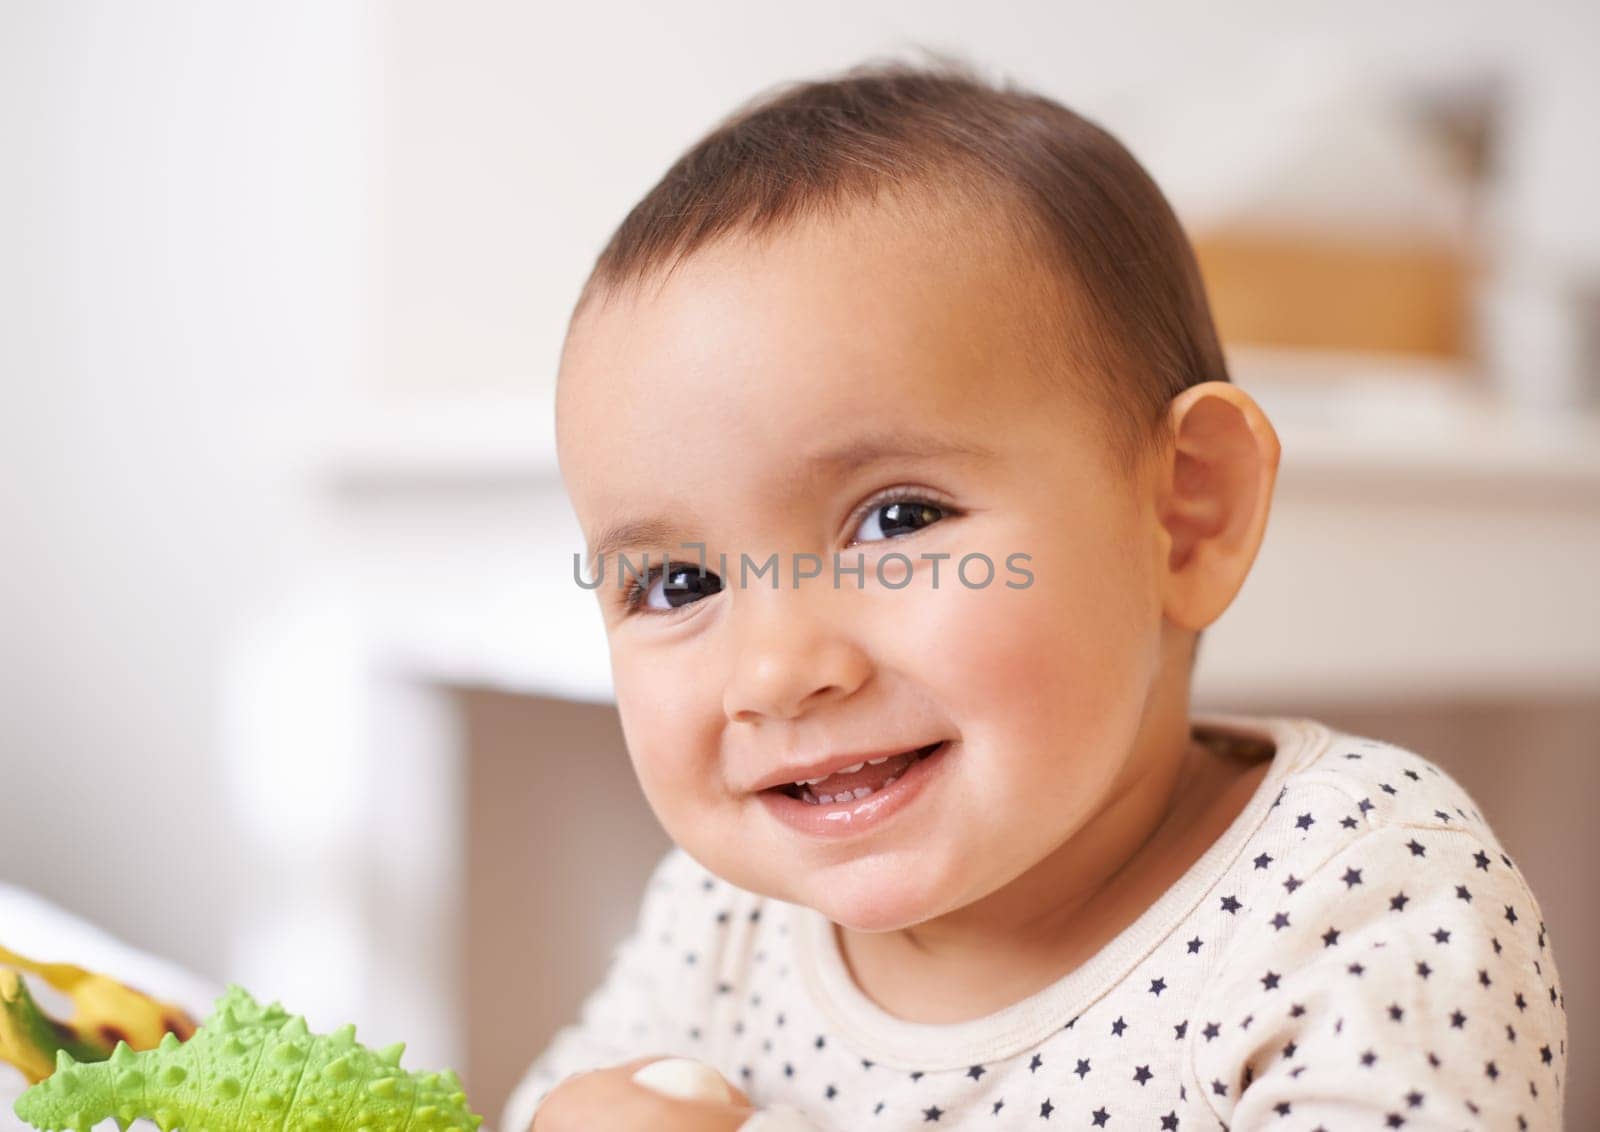 Baby, toddler portrait and toy in home, childhood and care for enjoyment in bedroom. Girl, kid and happy for child development and relax in nursery, plastic animal and play games or entertainment.